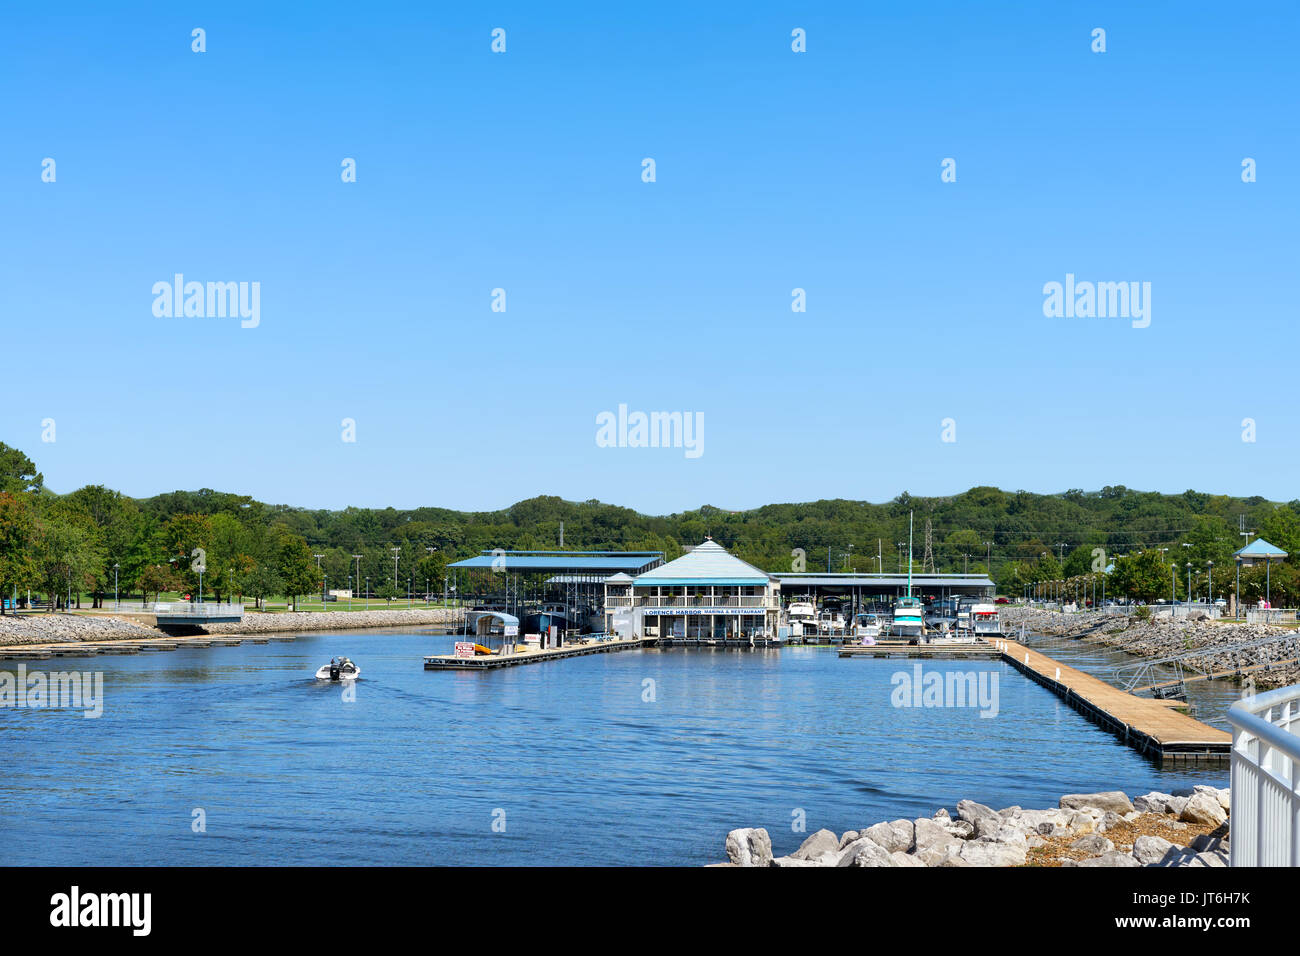 A beautiful summer day at the marina in Florence, Alabama near McFarland Park. The marina is on the Tennessee River. Stock Photo